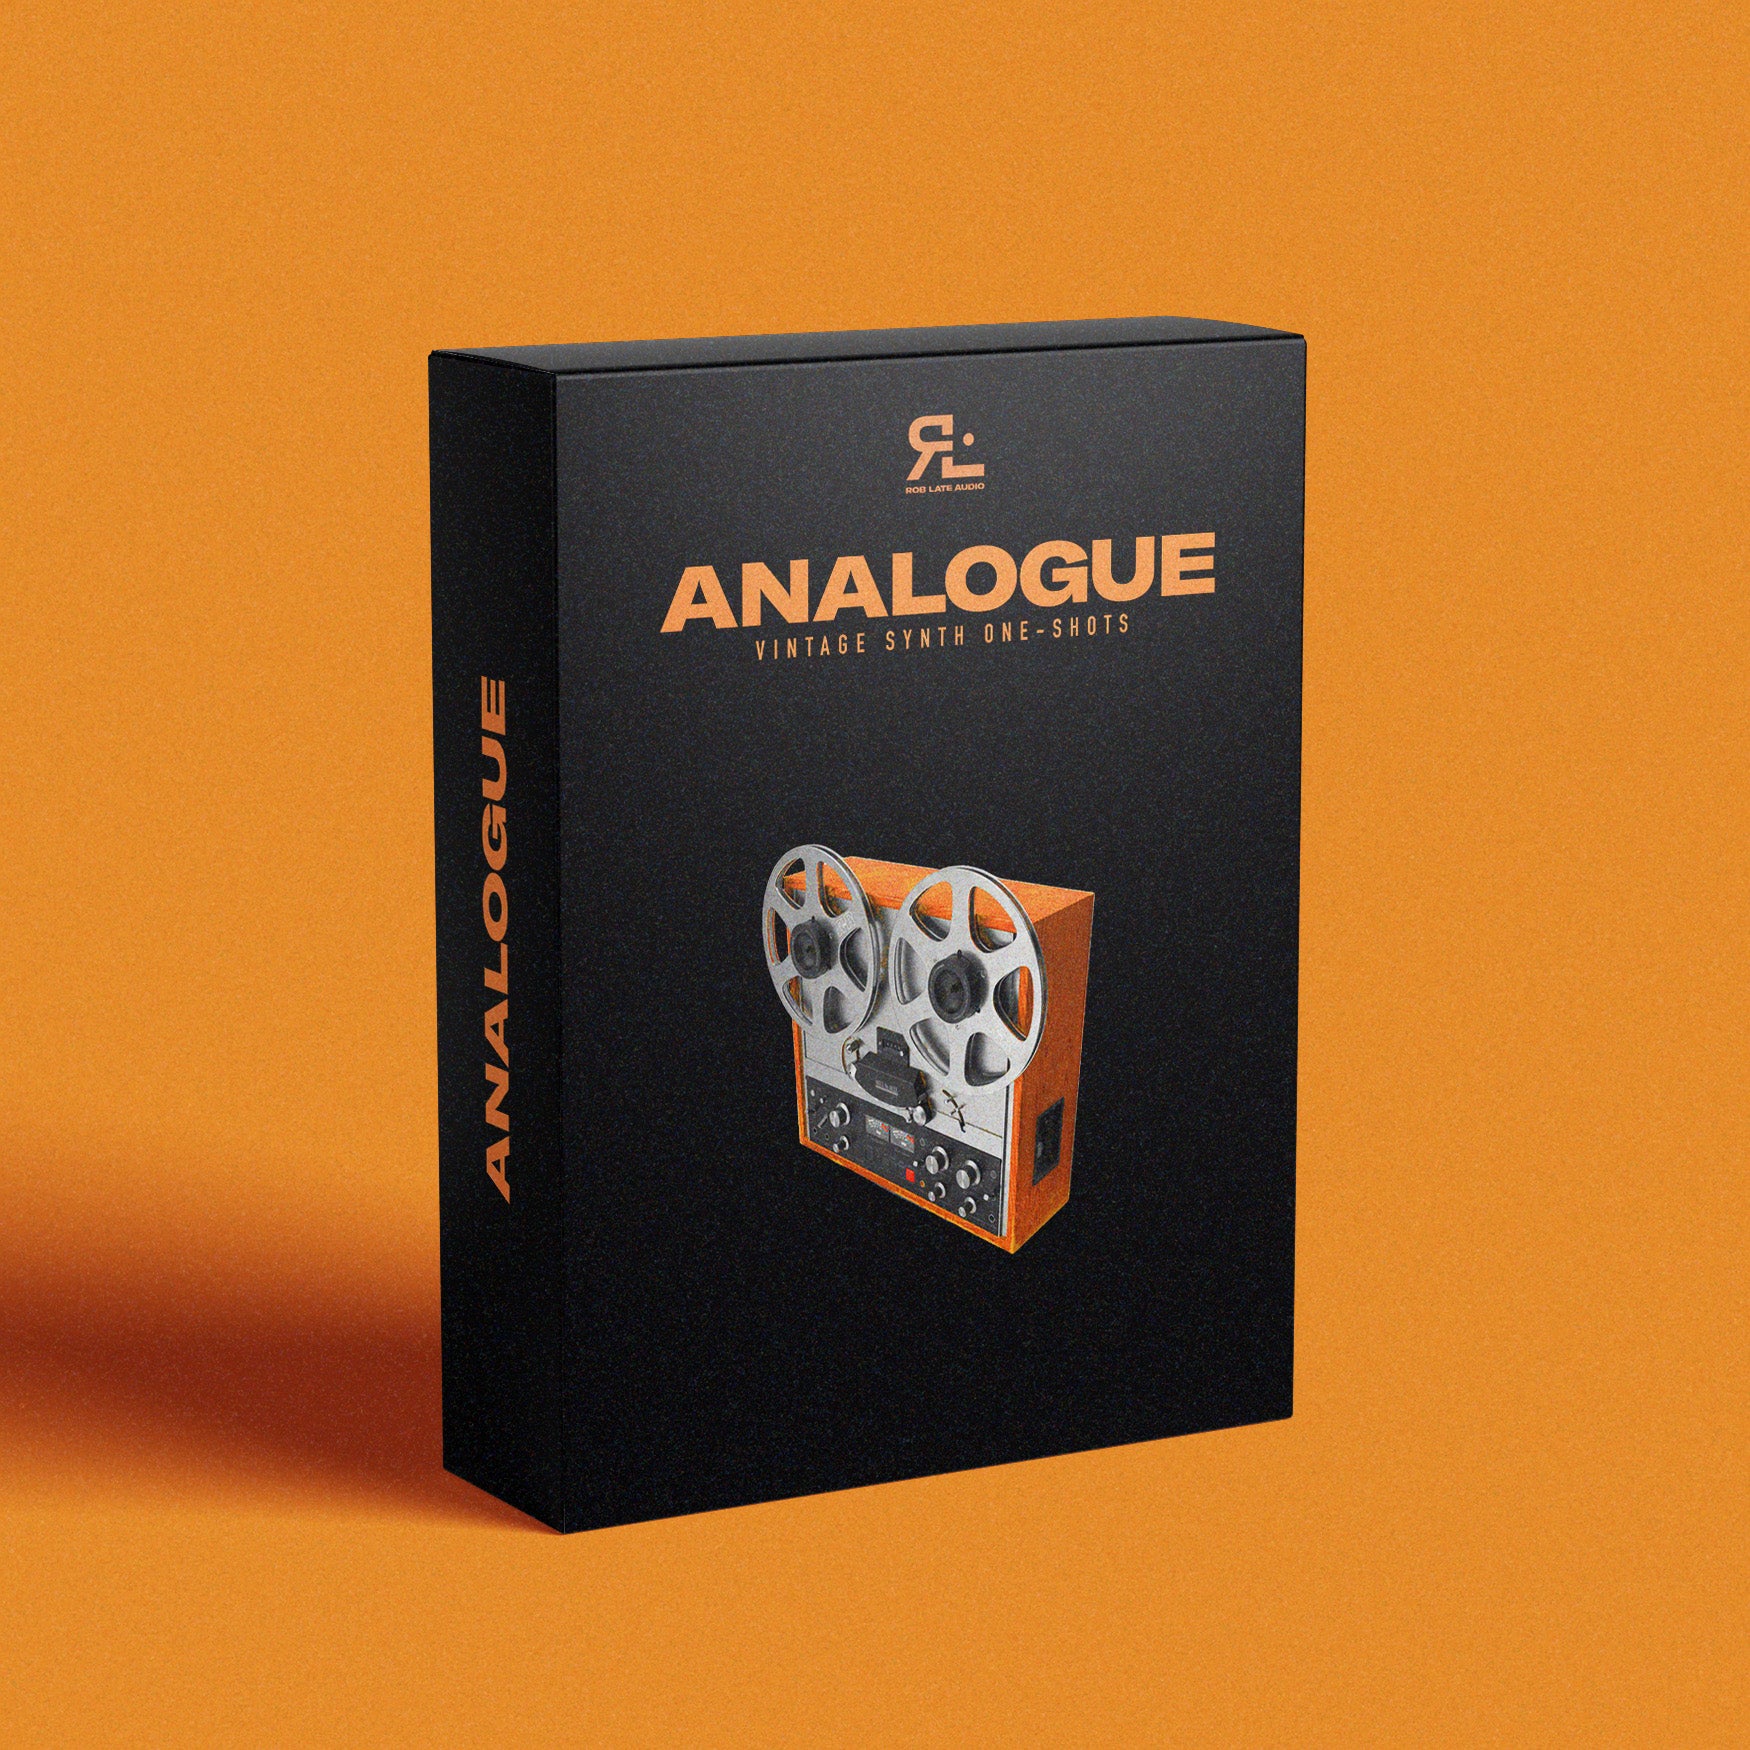 Analogue - Vintage Synth One-Shots Sample Pack